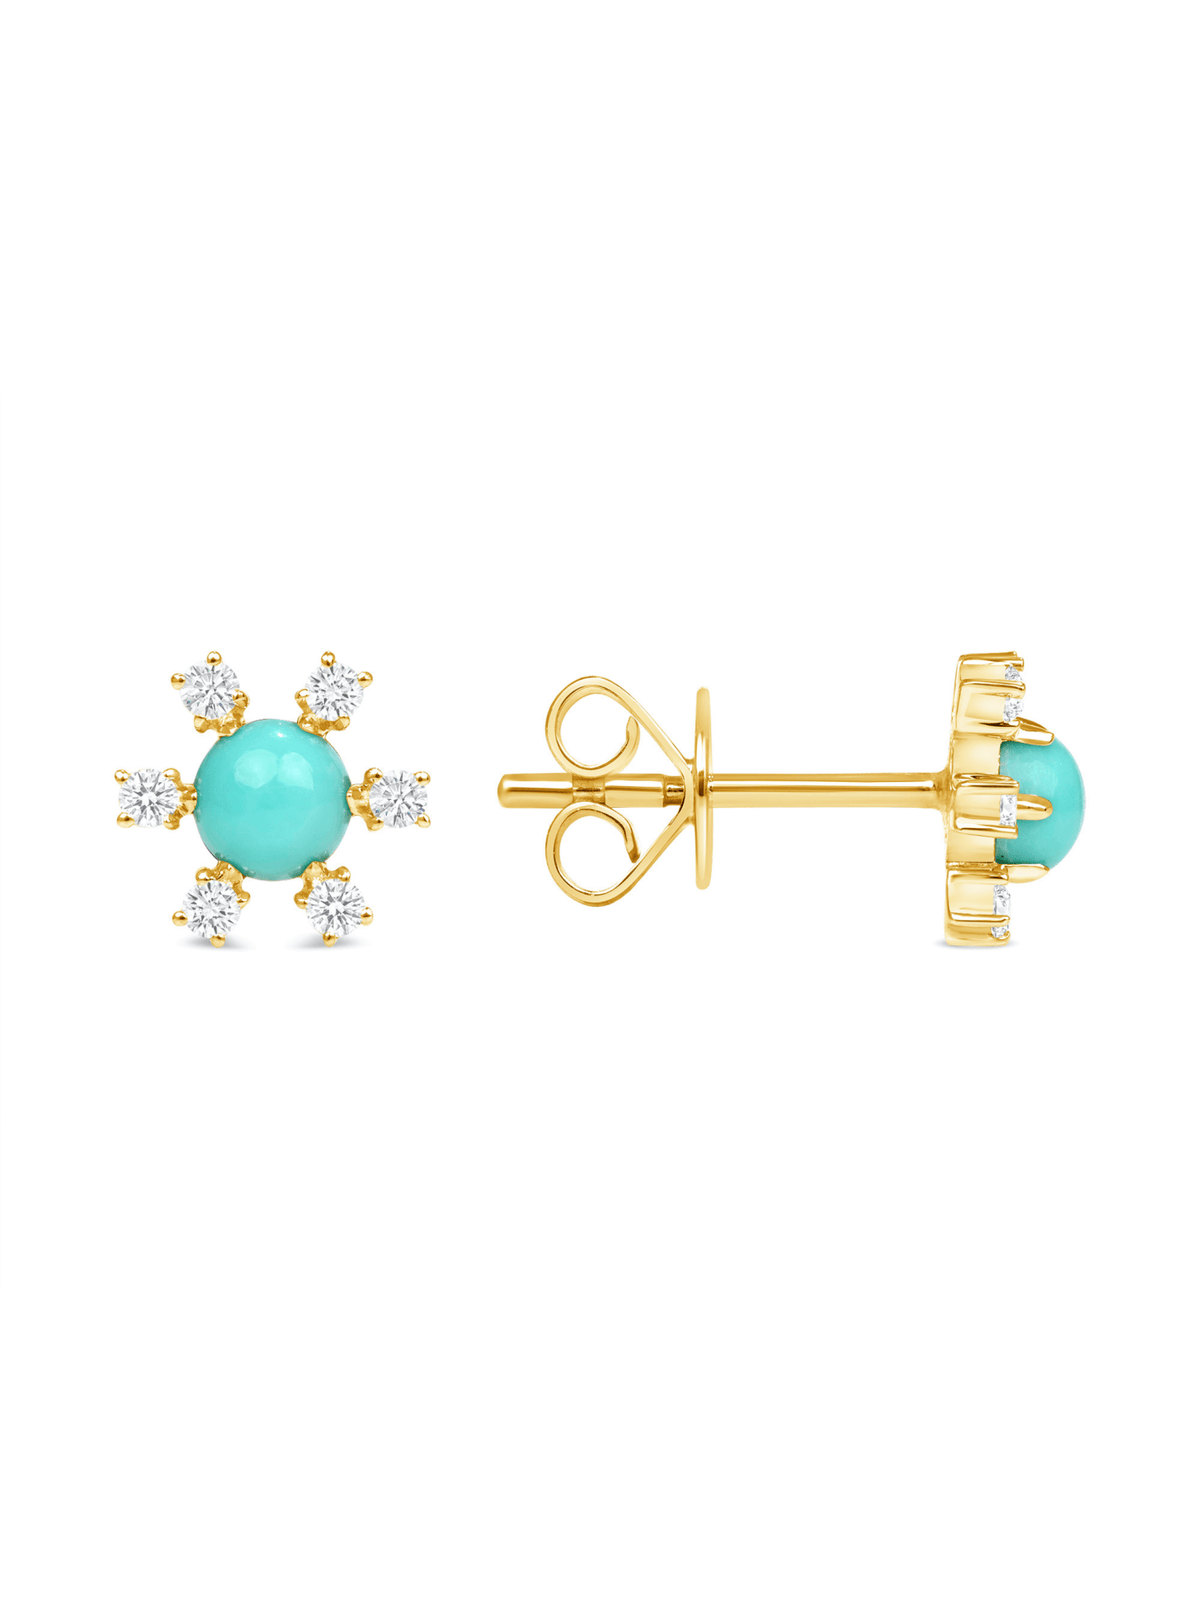 Turquoise earrings with diamonds yellow gold on white background